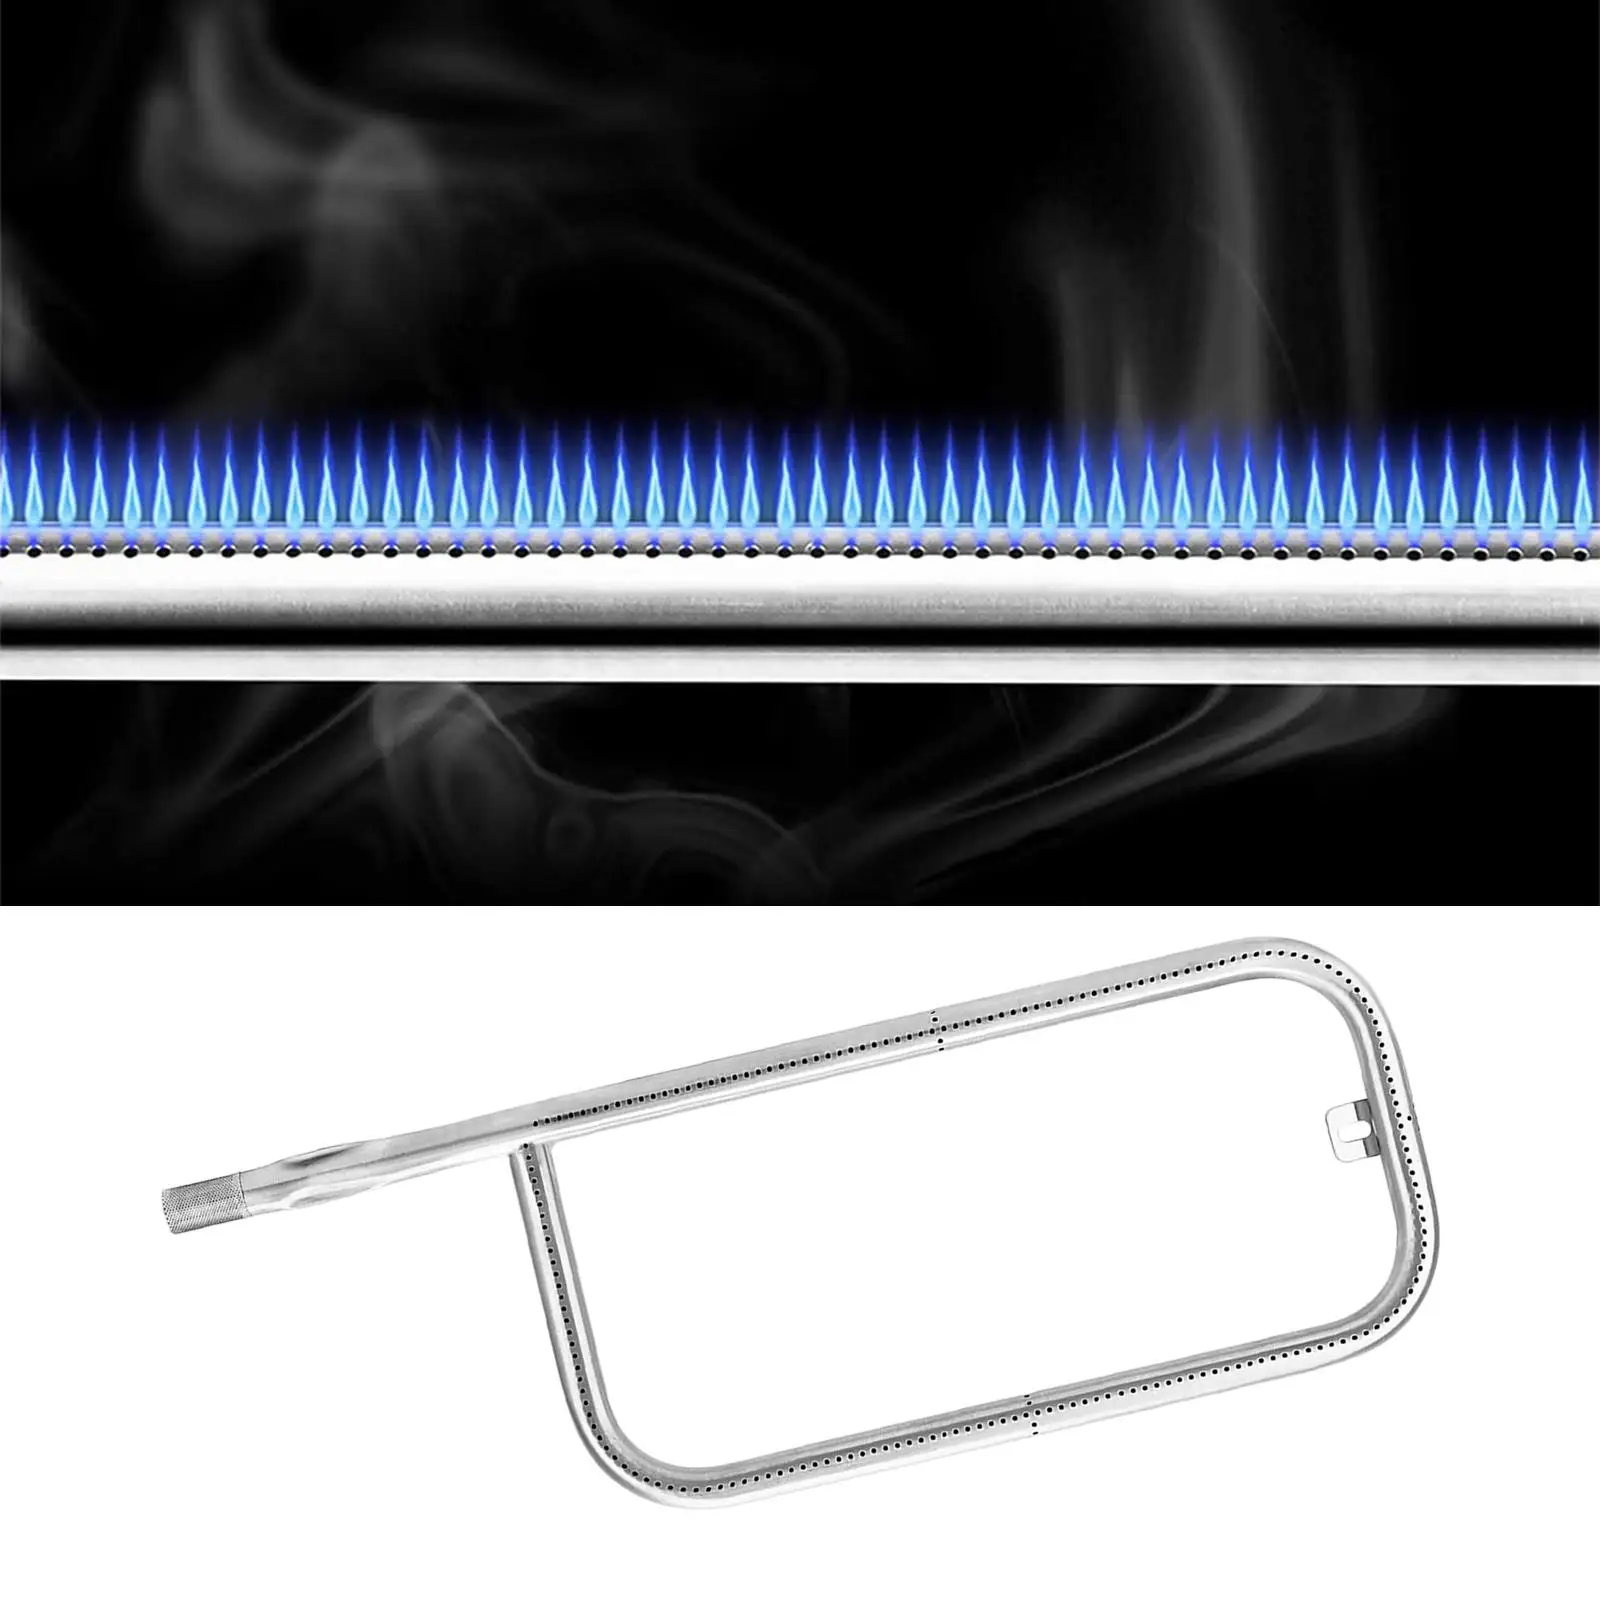 Stainless Steel Burner Tube Web69956 Parts Gas Rack Grill Burner for Q200 Q220 Q2000 Q2200 396000 396002 396001 Easy to Install